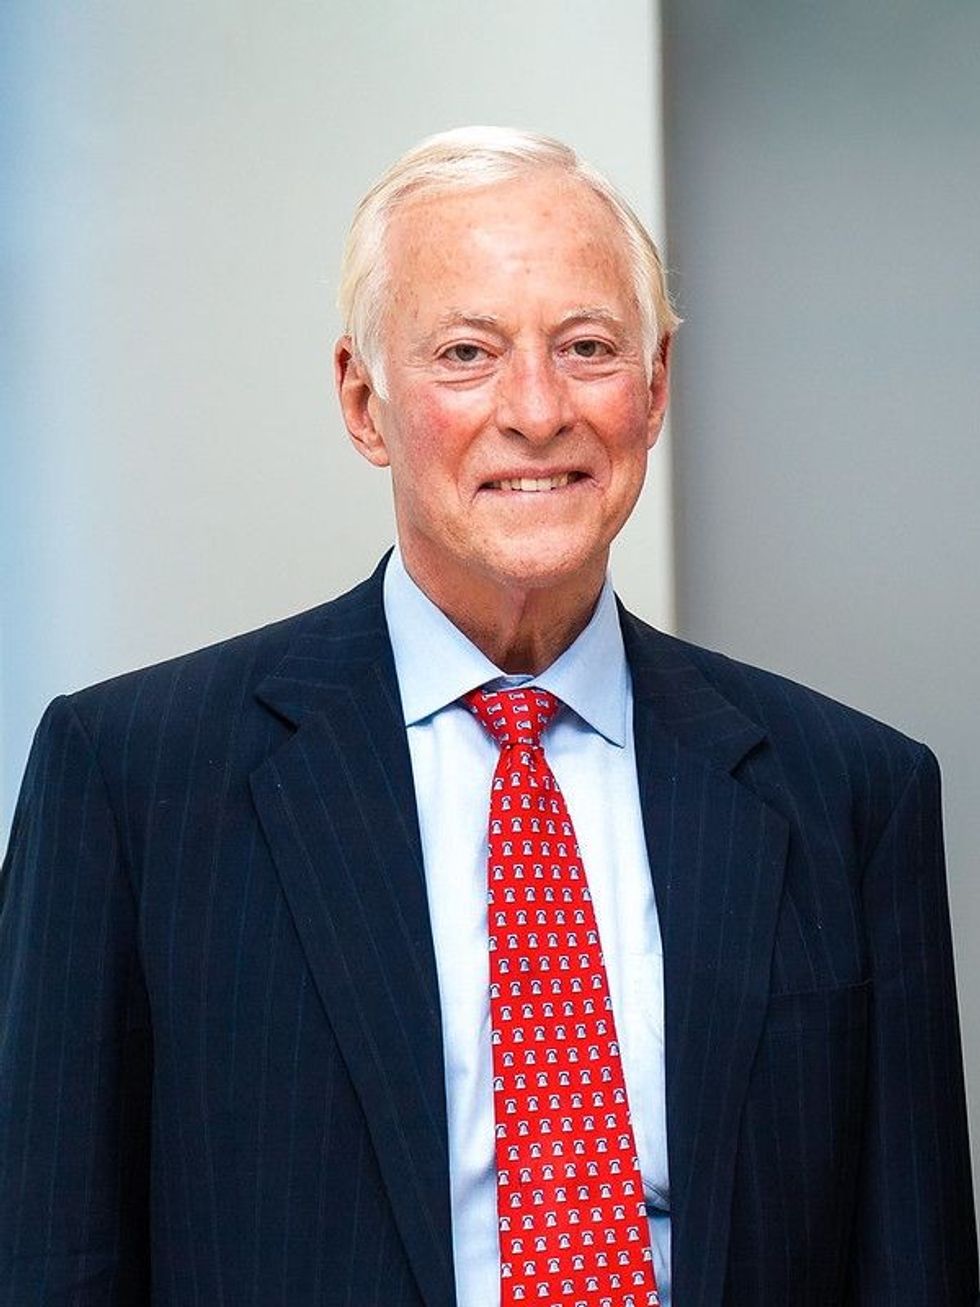 Brian Tracy is married to Barbara Tracy since June 30, 1979.